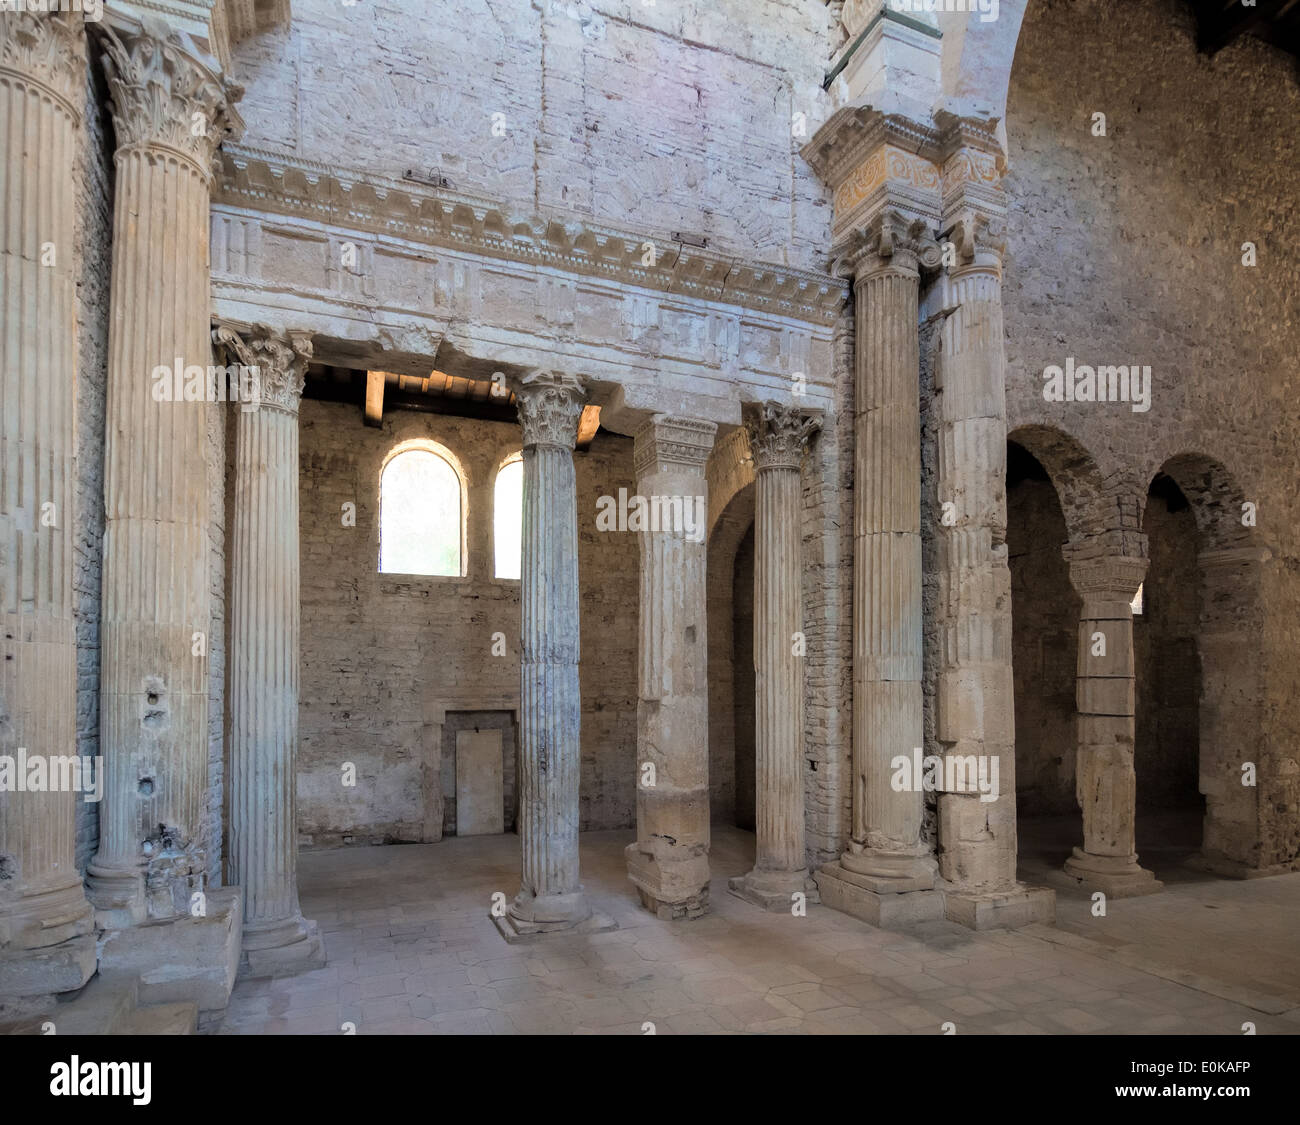 Romanesque church of San Salvatore in Spoleto, Umbria, Italy; interior view with column and capitals Stock Photo